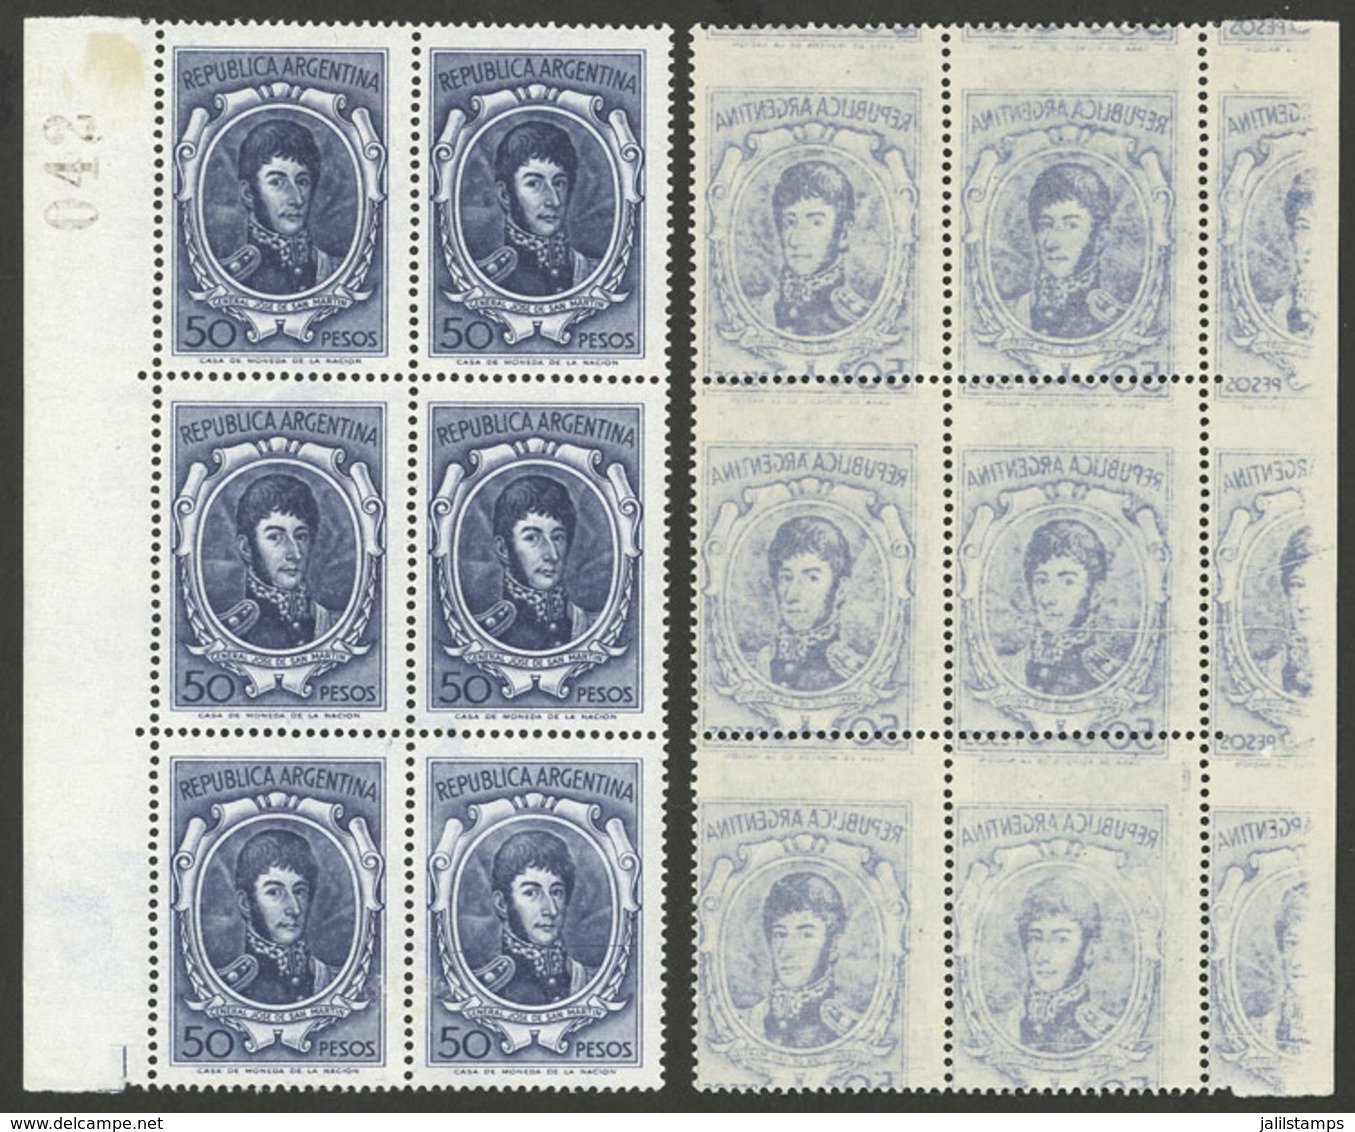 ARGENTINA: GJ.1318, Block Of 6 With Strong OFFSET IMPRESSION ON BACK, Very Handsome! - Unused Stamps